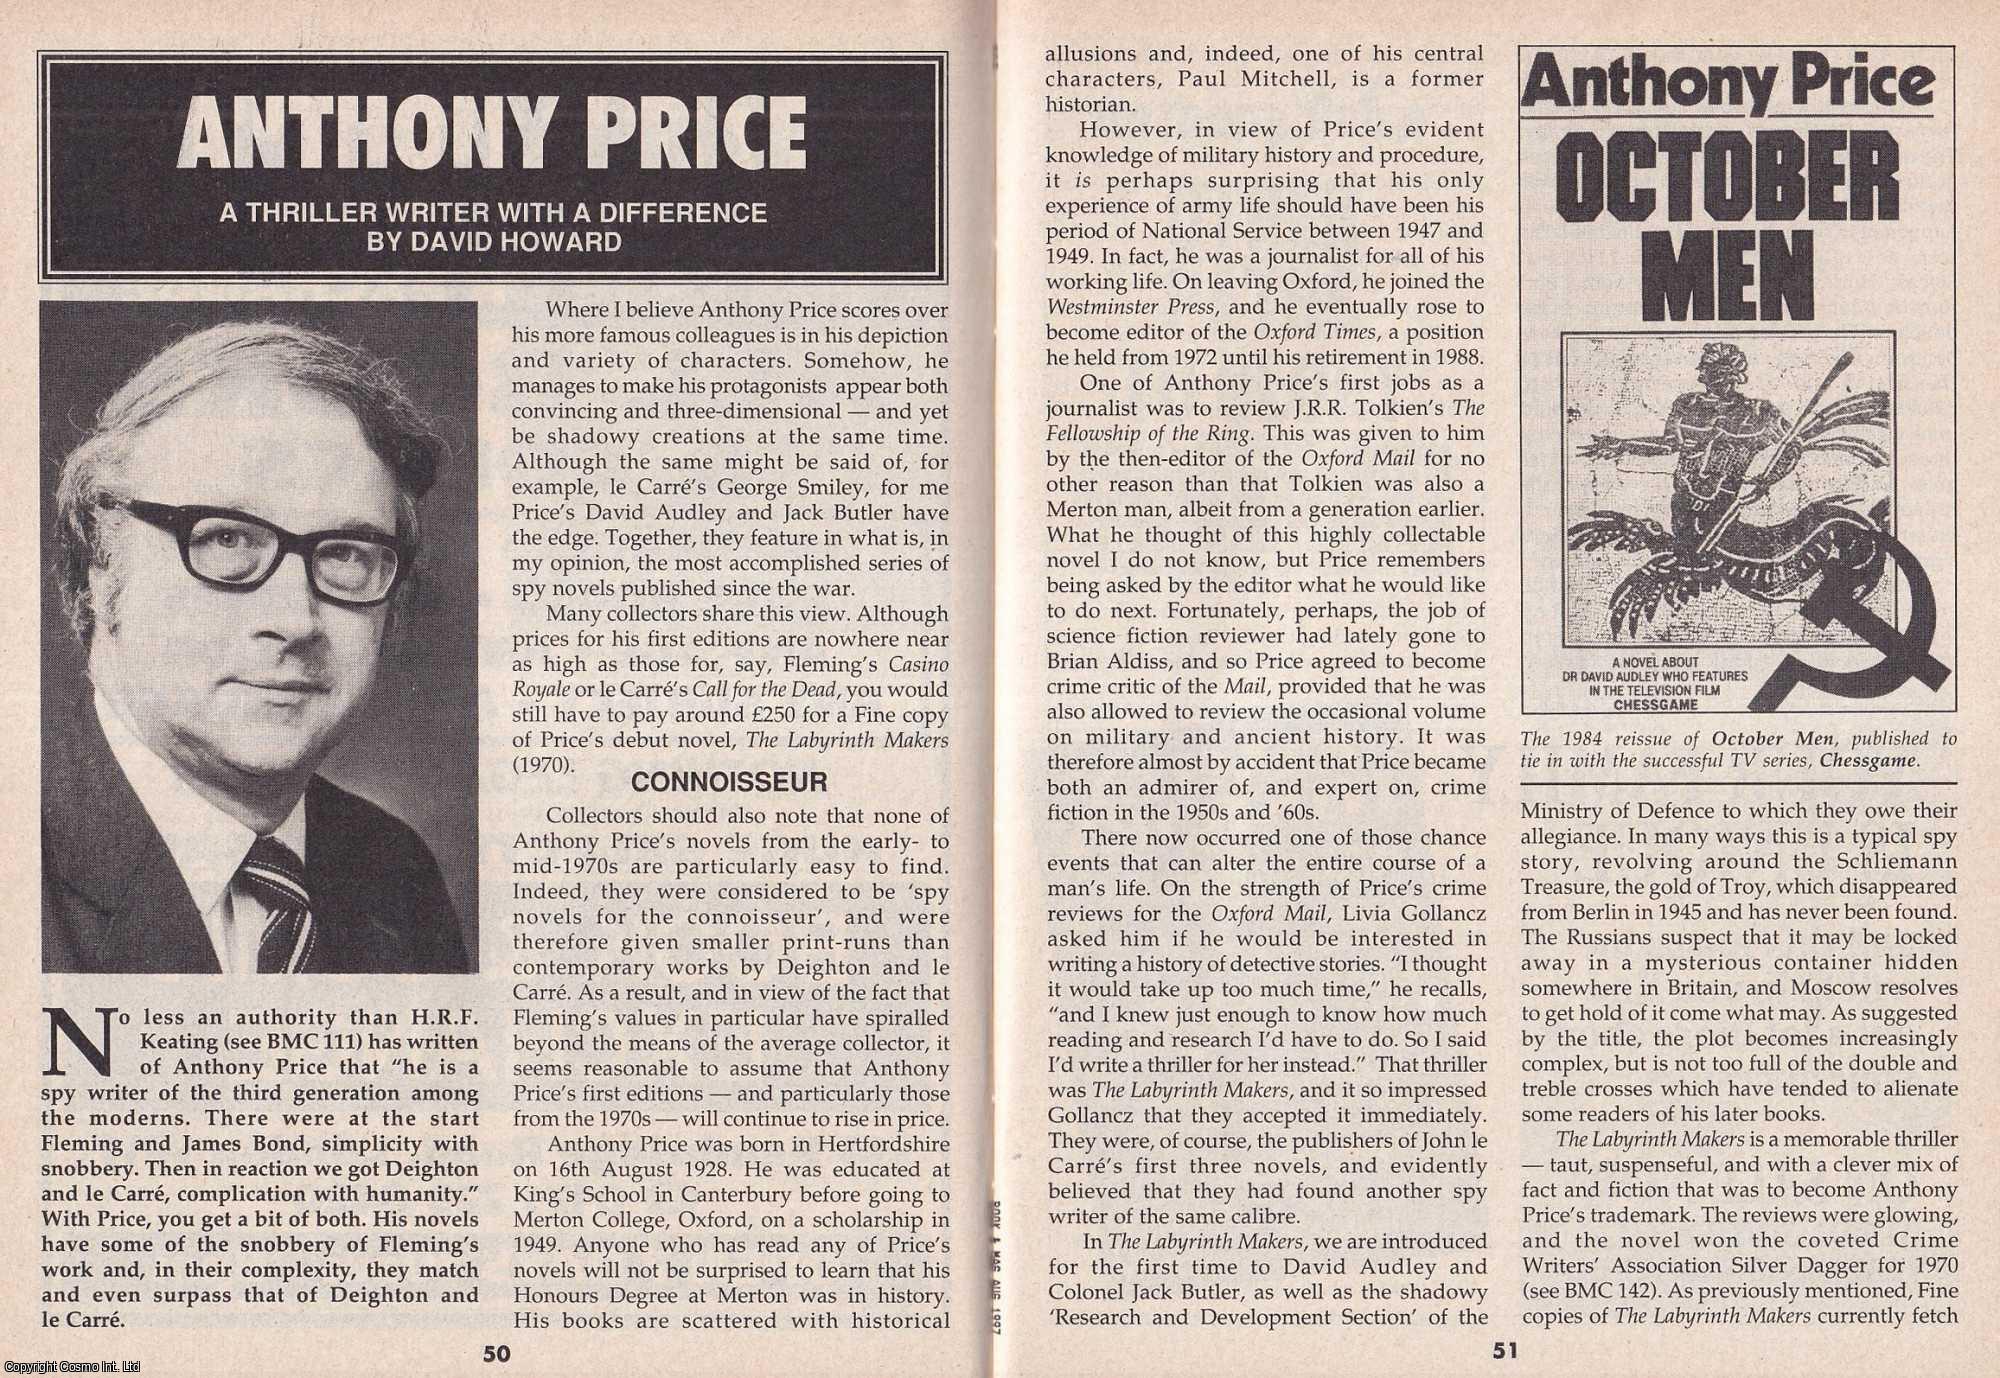 David Howard - Anthony Price, thriller writer. This is an original article separated from an issue of The Book & Magazine Collector publication, 1997.